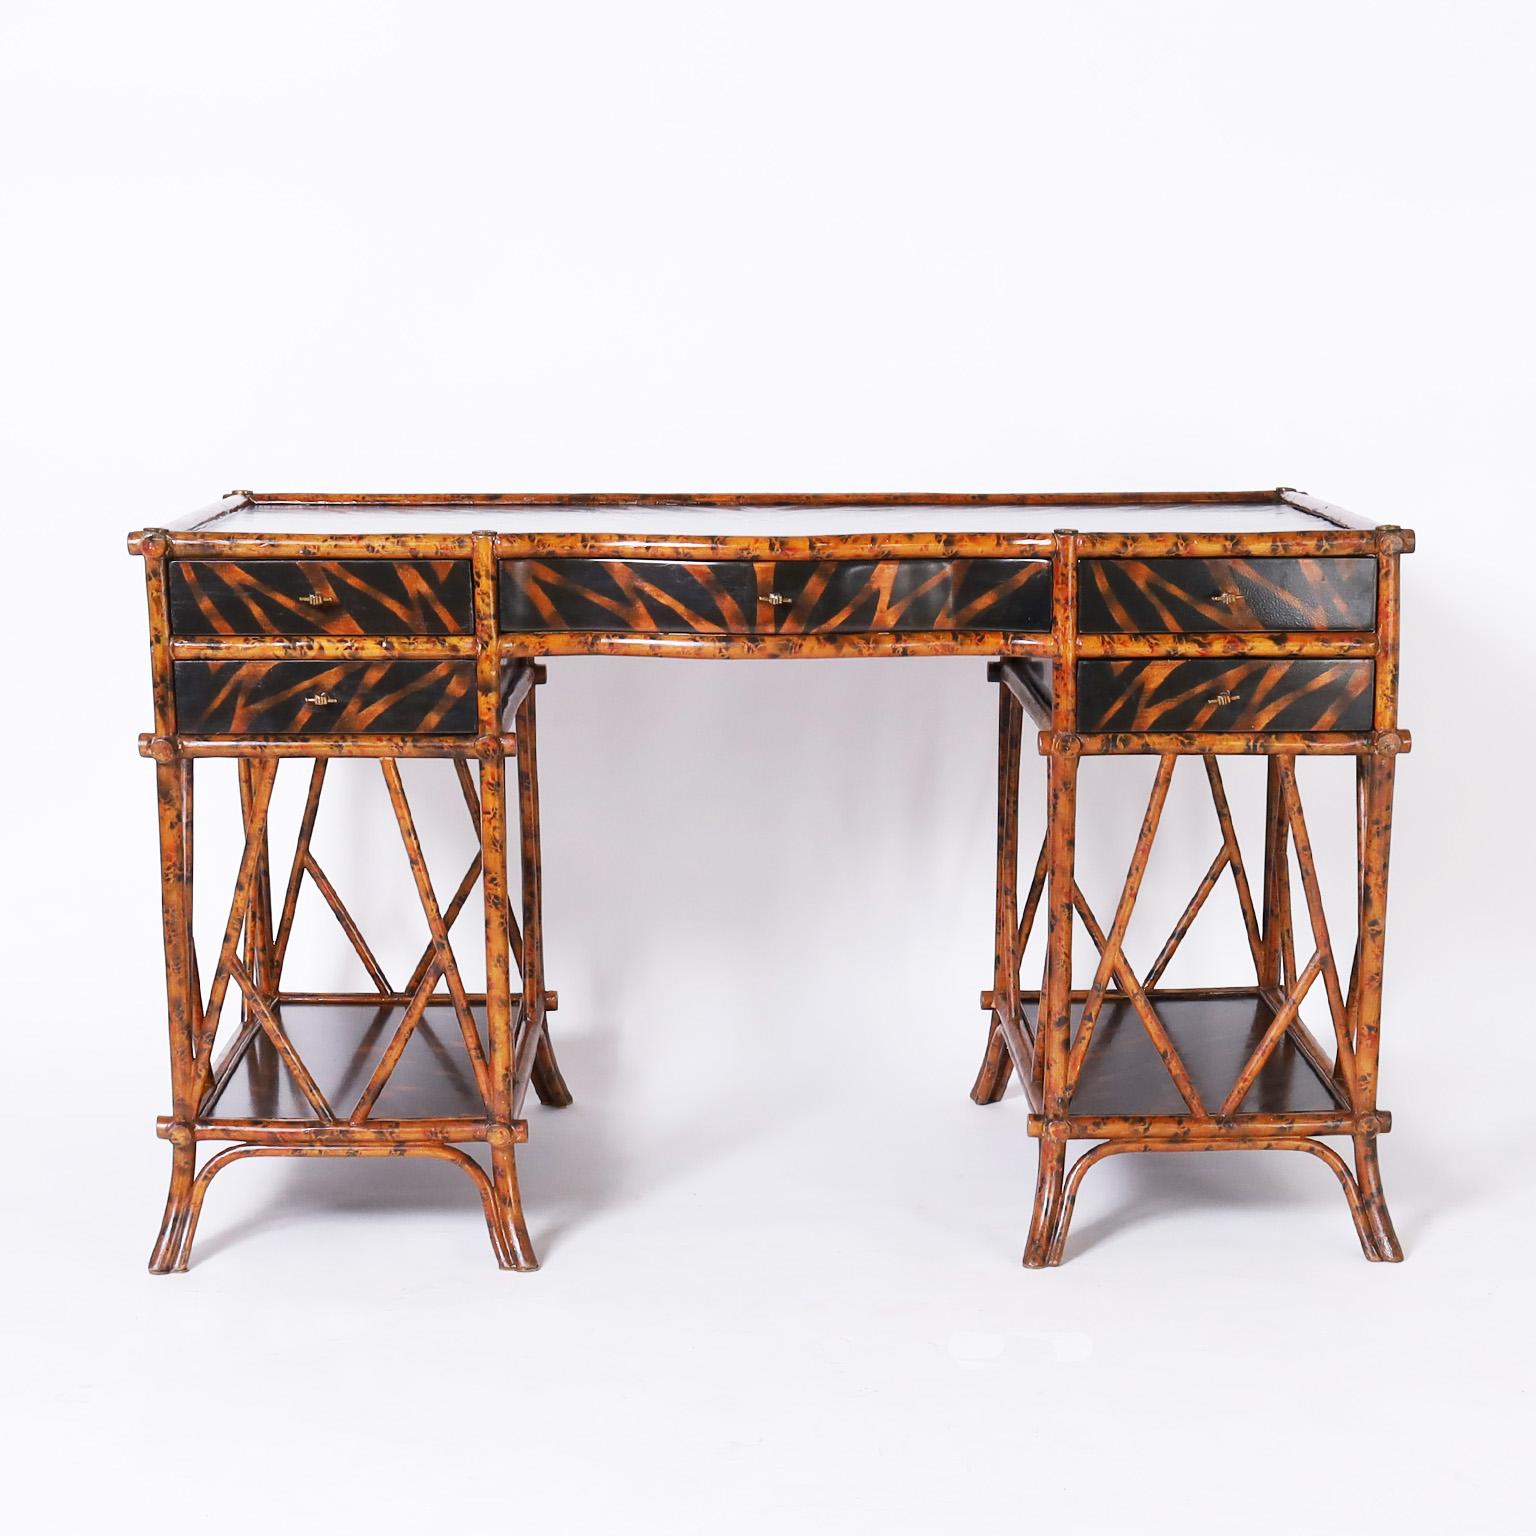 Vintage British Colonial style desk featuring a faux bamboo frame with a faux tortoise finish, lacquered panels hand decorated with a faux jungle motif, brass fist and stick hardware and splayed feet. Signed Maitland-Smith in a drawer.